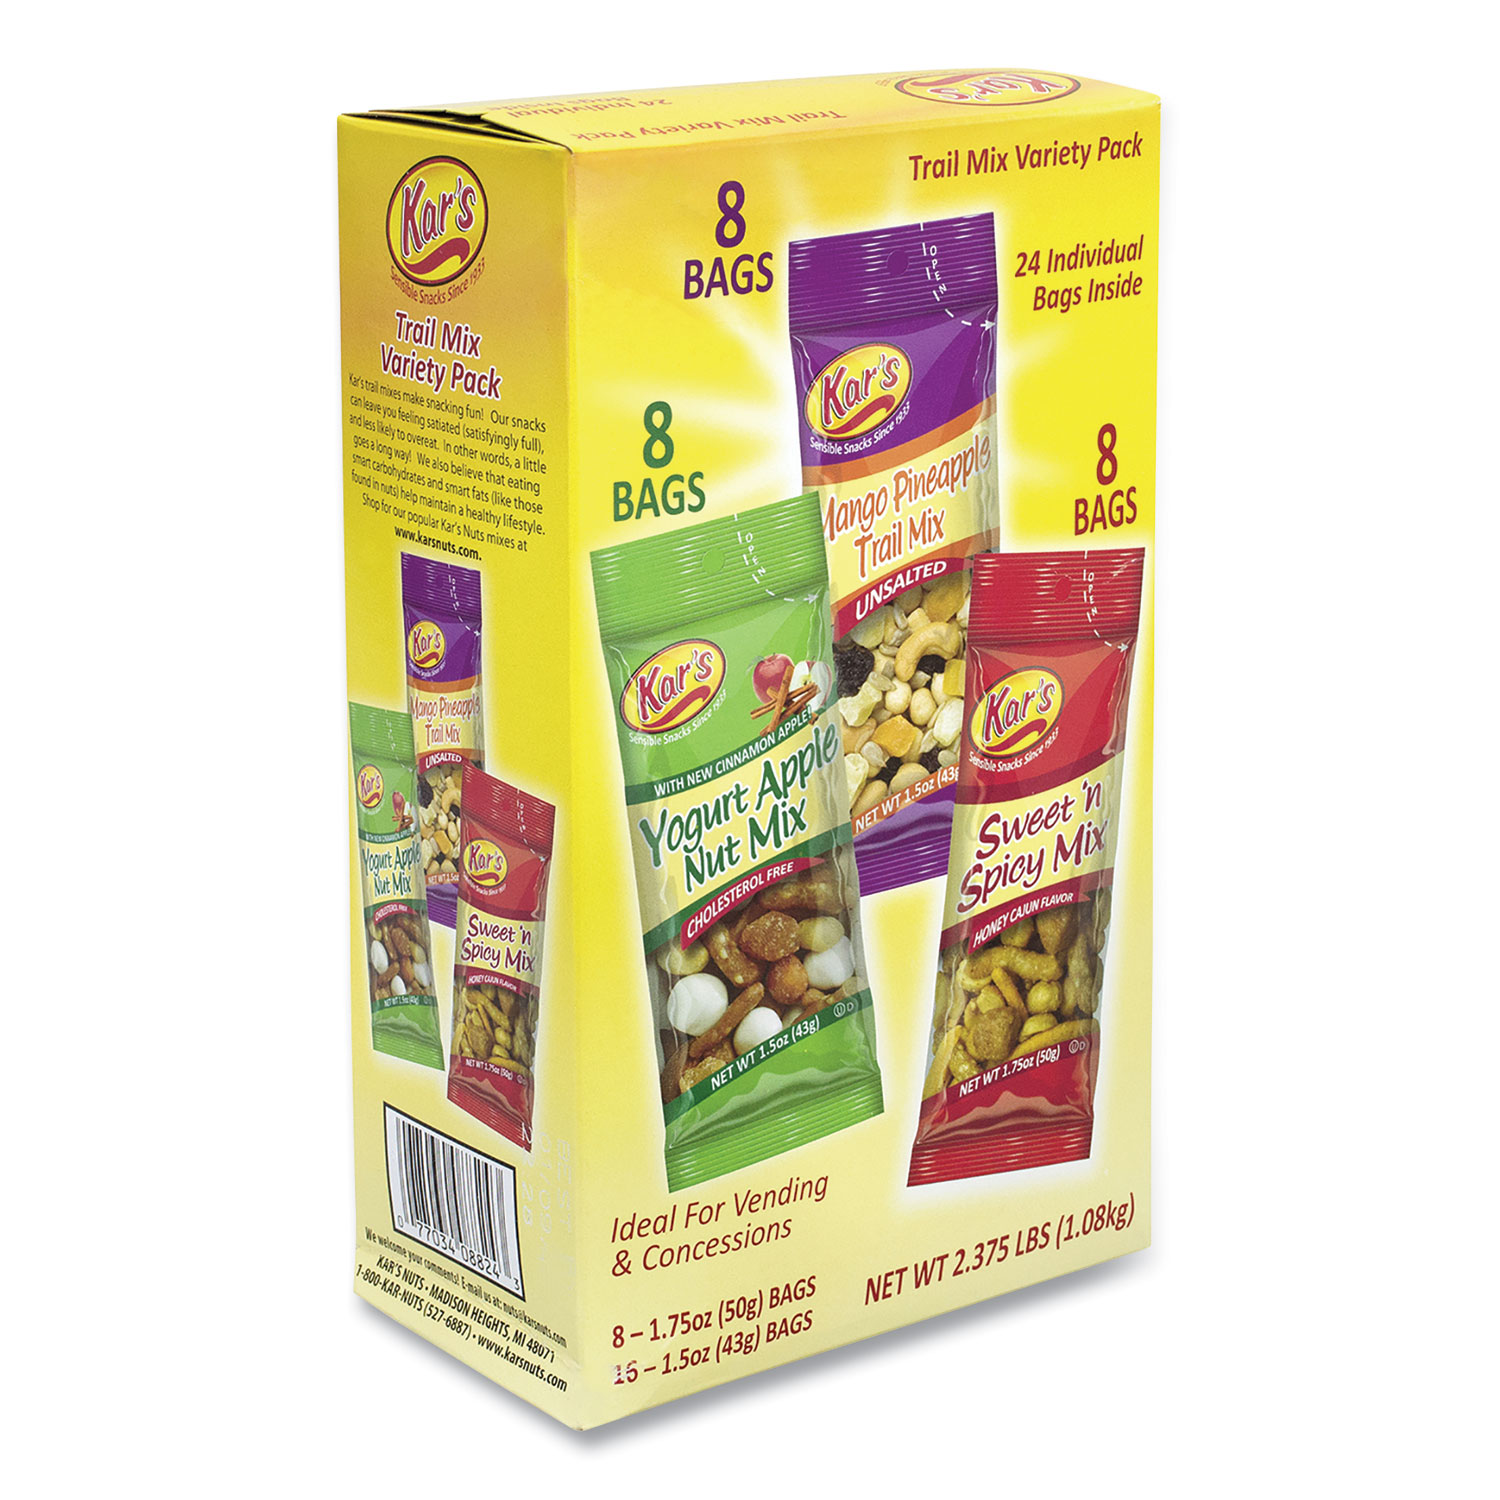 Kars Trail Mix Variety Pack, Assorted Flavors, 24 Packets/Box, Free Delivery in 1-4 Business Days